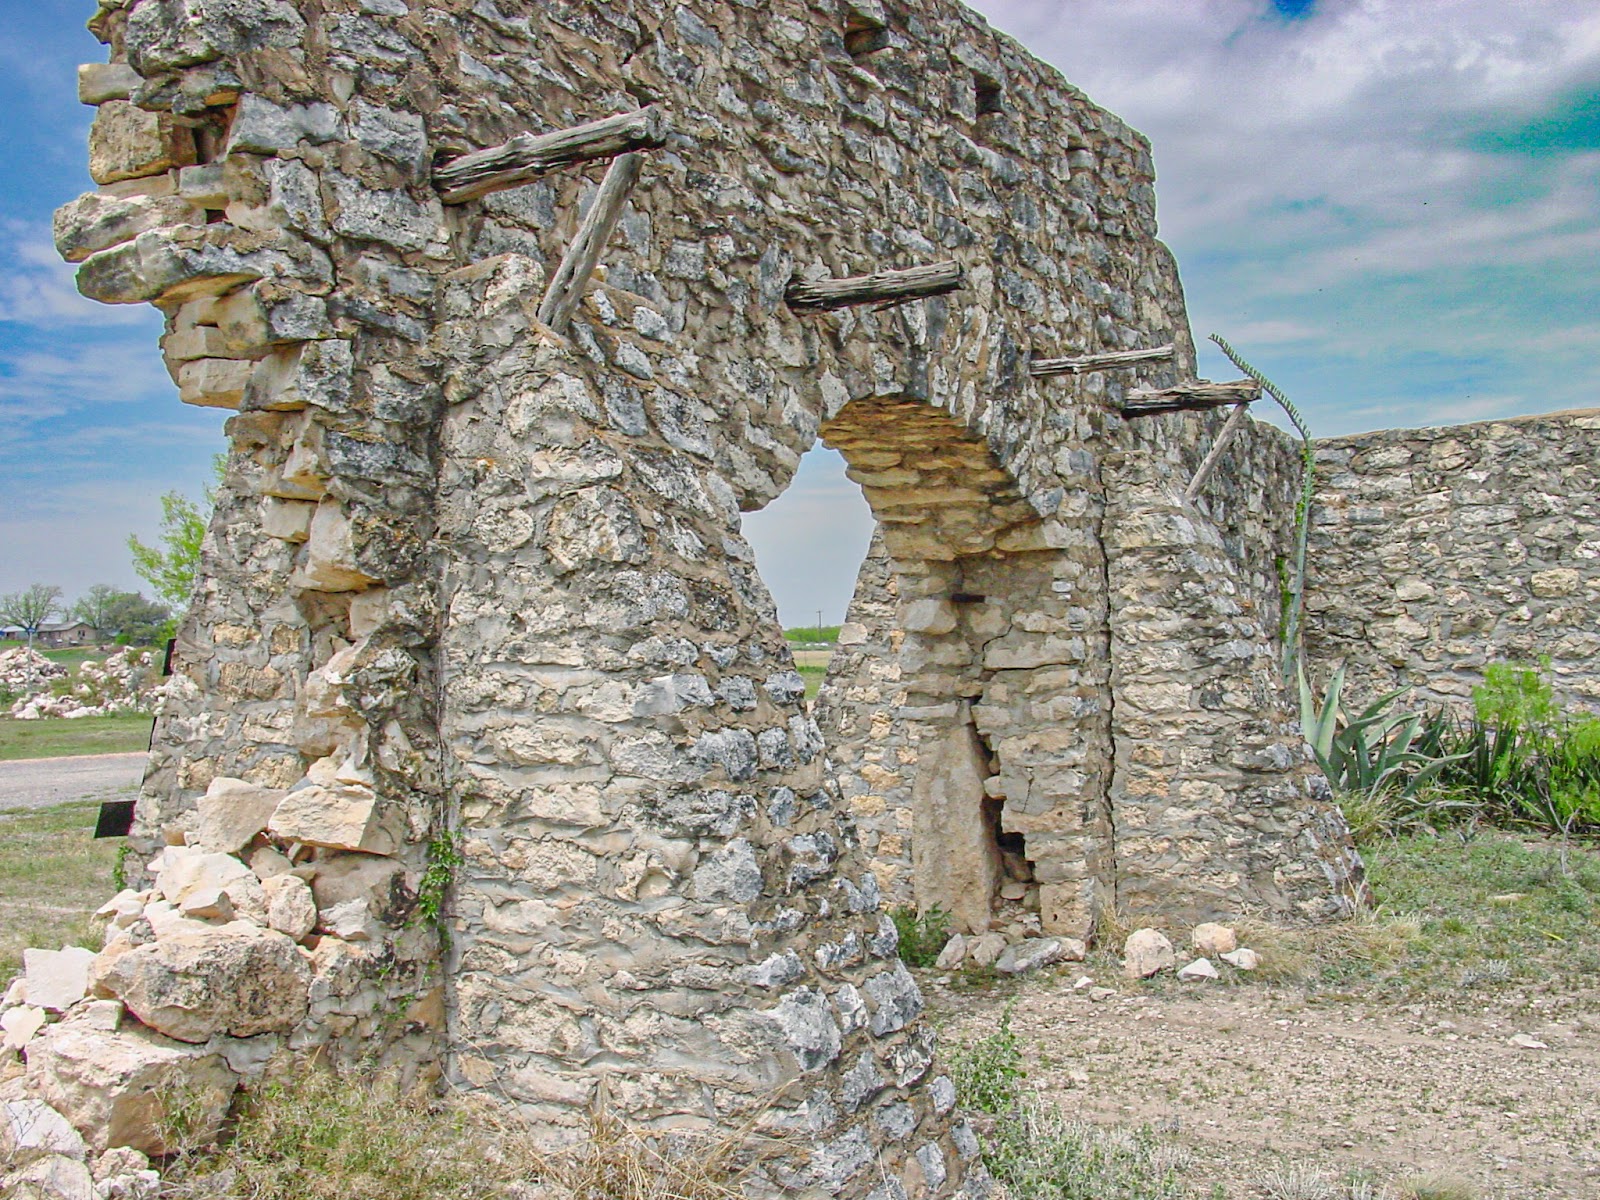 The ruins of an old fieldstone structure with an arched entrance and fallen walls. 